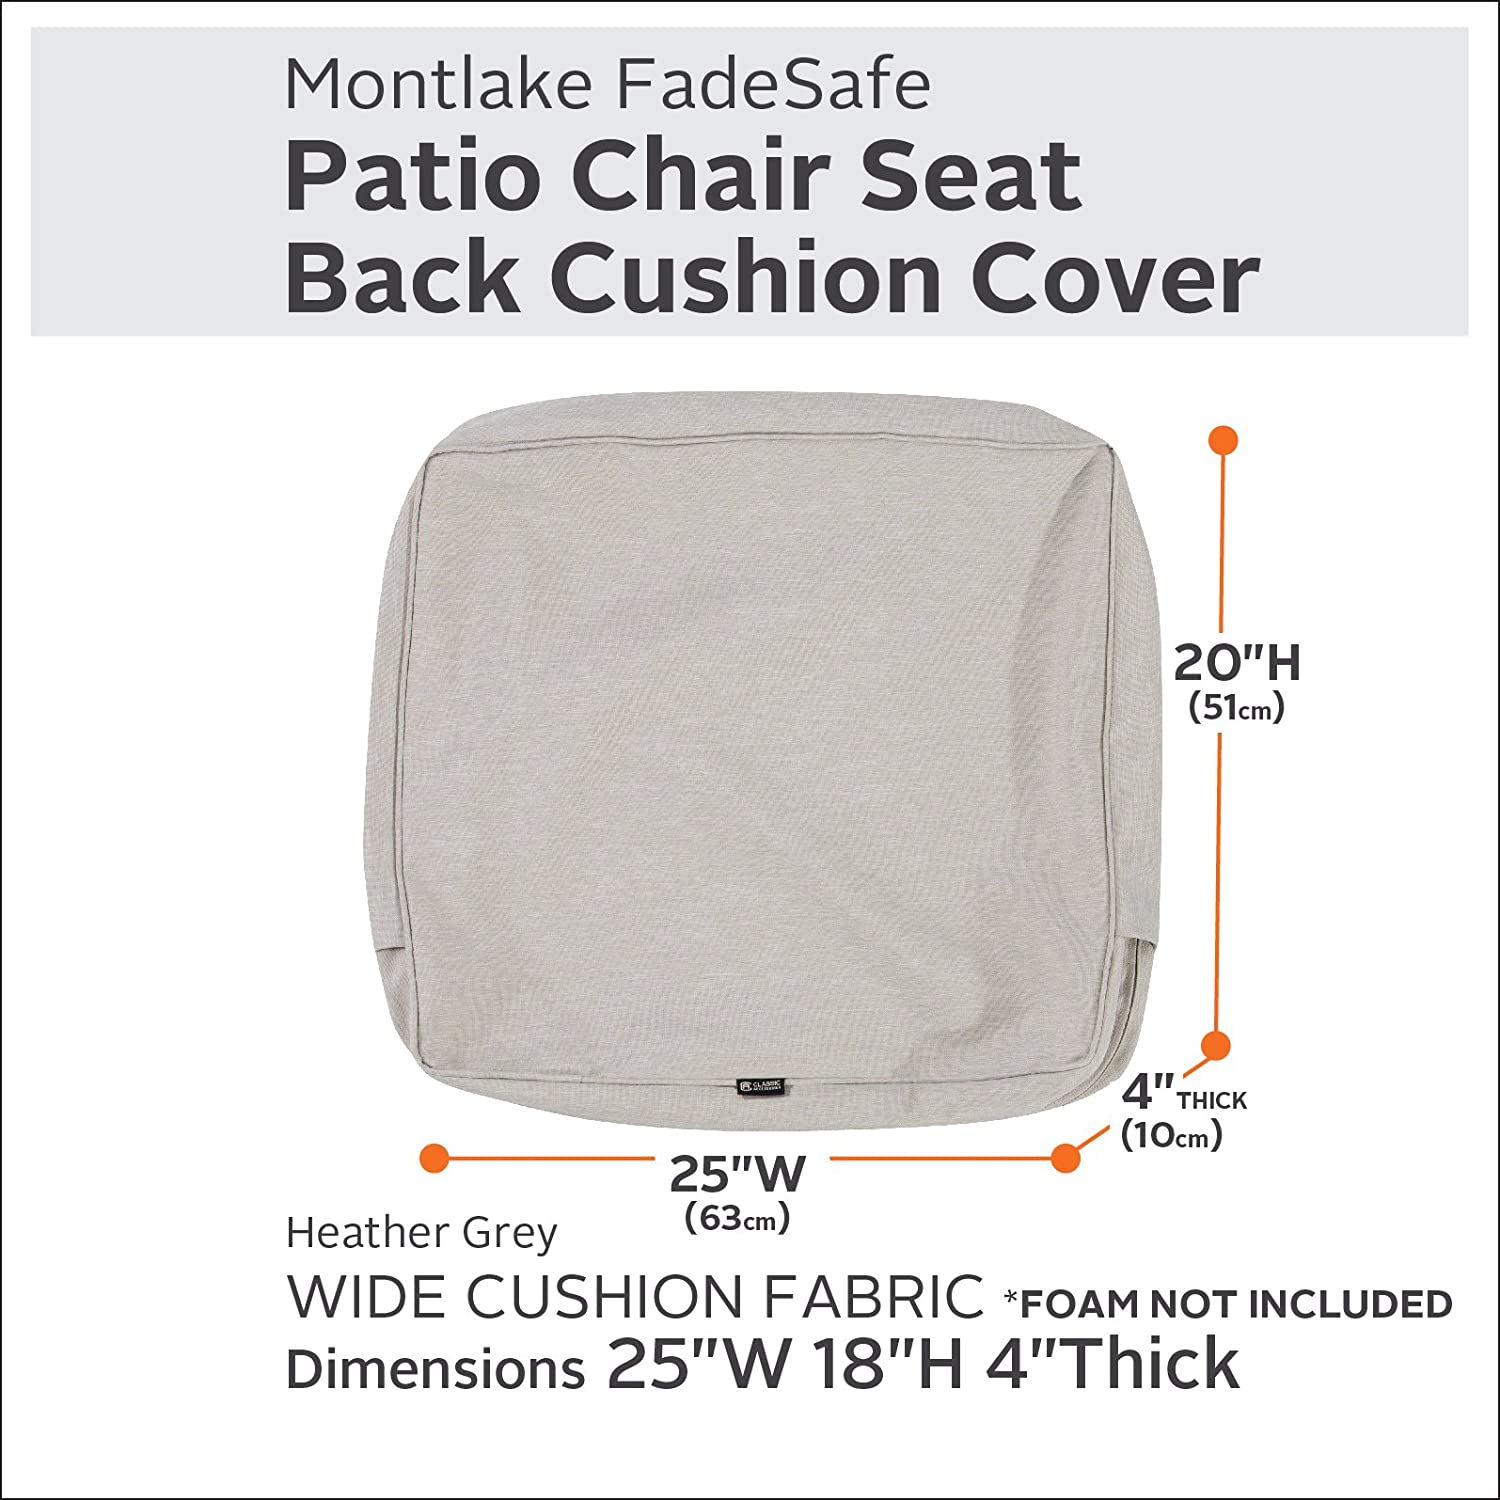 Classic Accessories Montlake Water-Resistant 25 x 18 x 4 Inch Outdoor Back Cushion Slip Cover, Patio Furniture Cushion Cover, Heather Grey